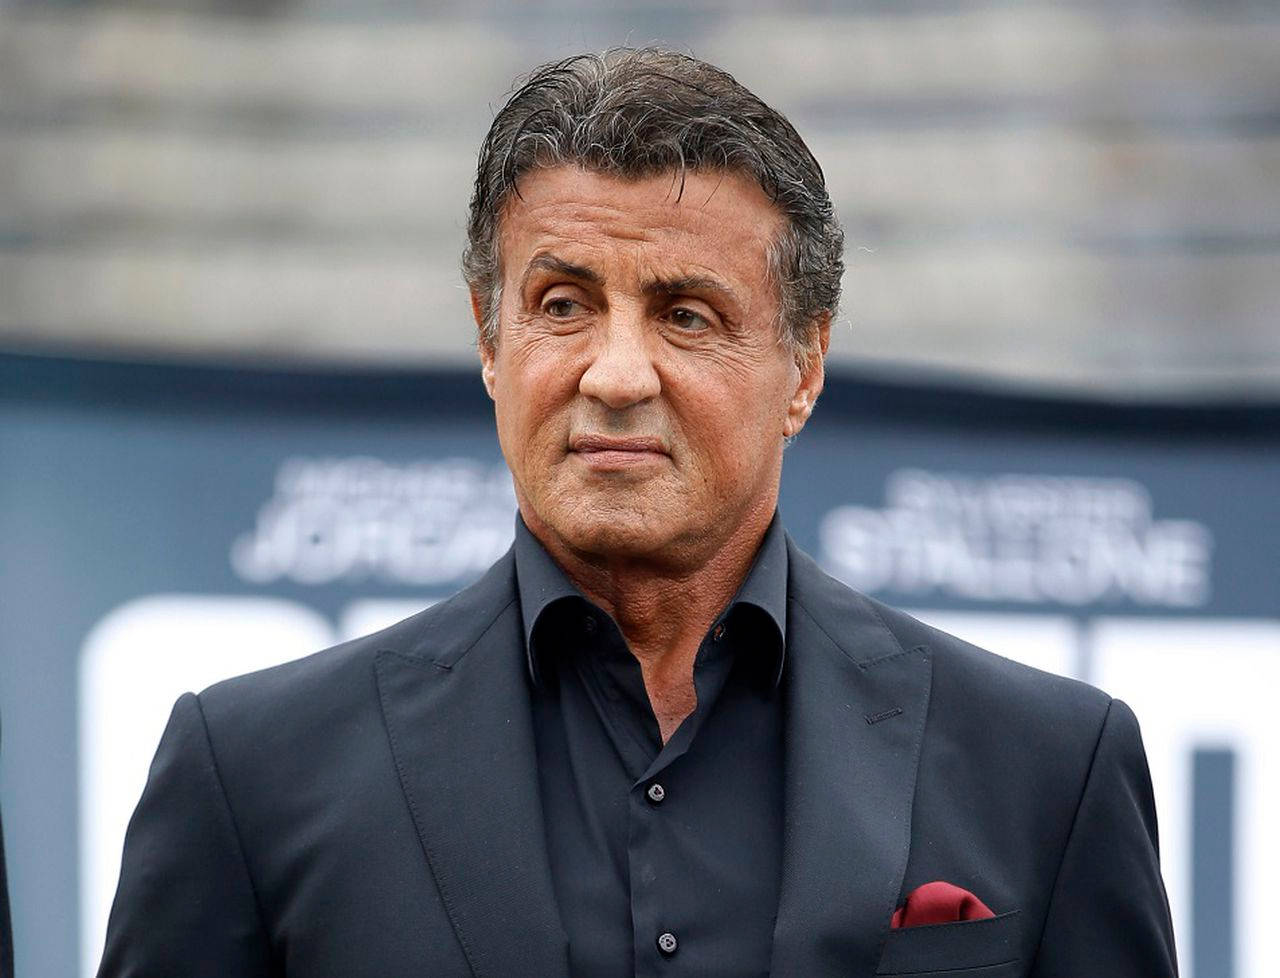 Sylvesterstallone Röd Näsduk - This Phrase Does Not Make Sense In The Context Of Computer Or Mobile Wallpaper, But If You Want To Use It As A Wallpaper Title, It Would Simply Mean 